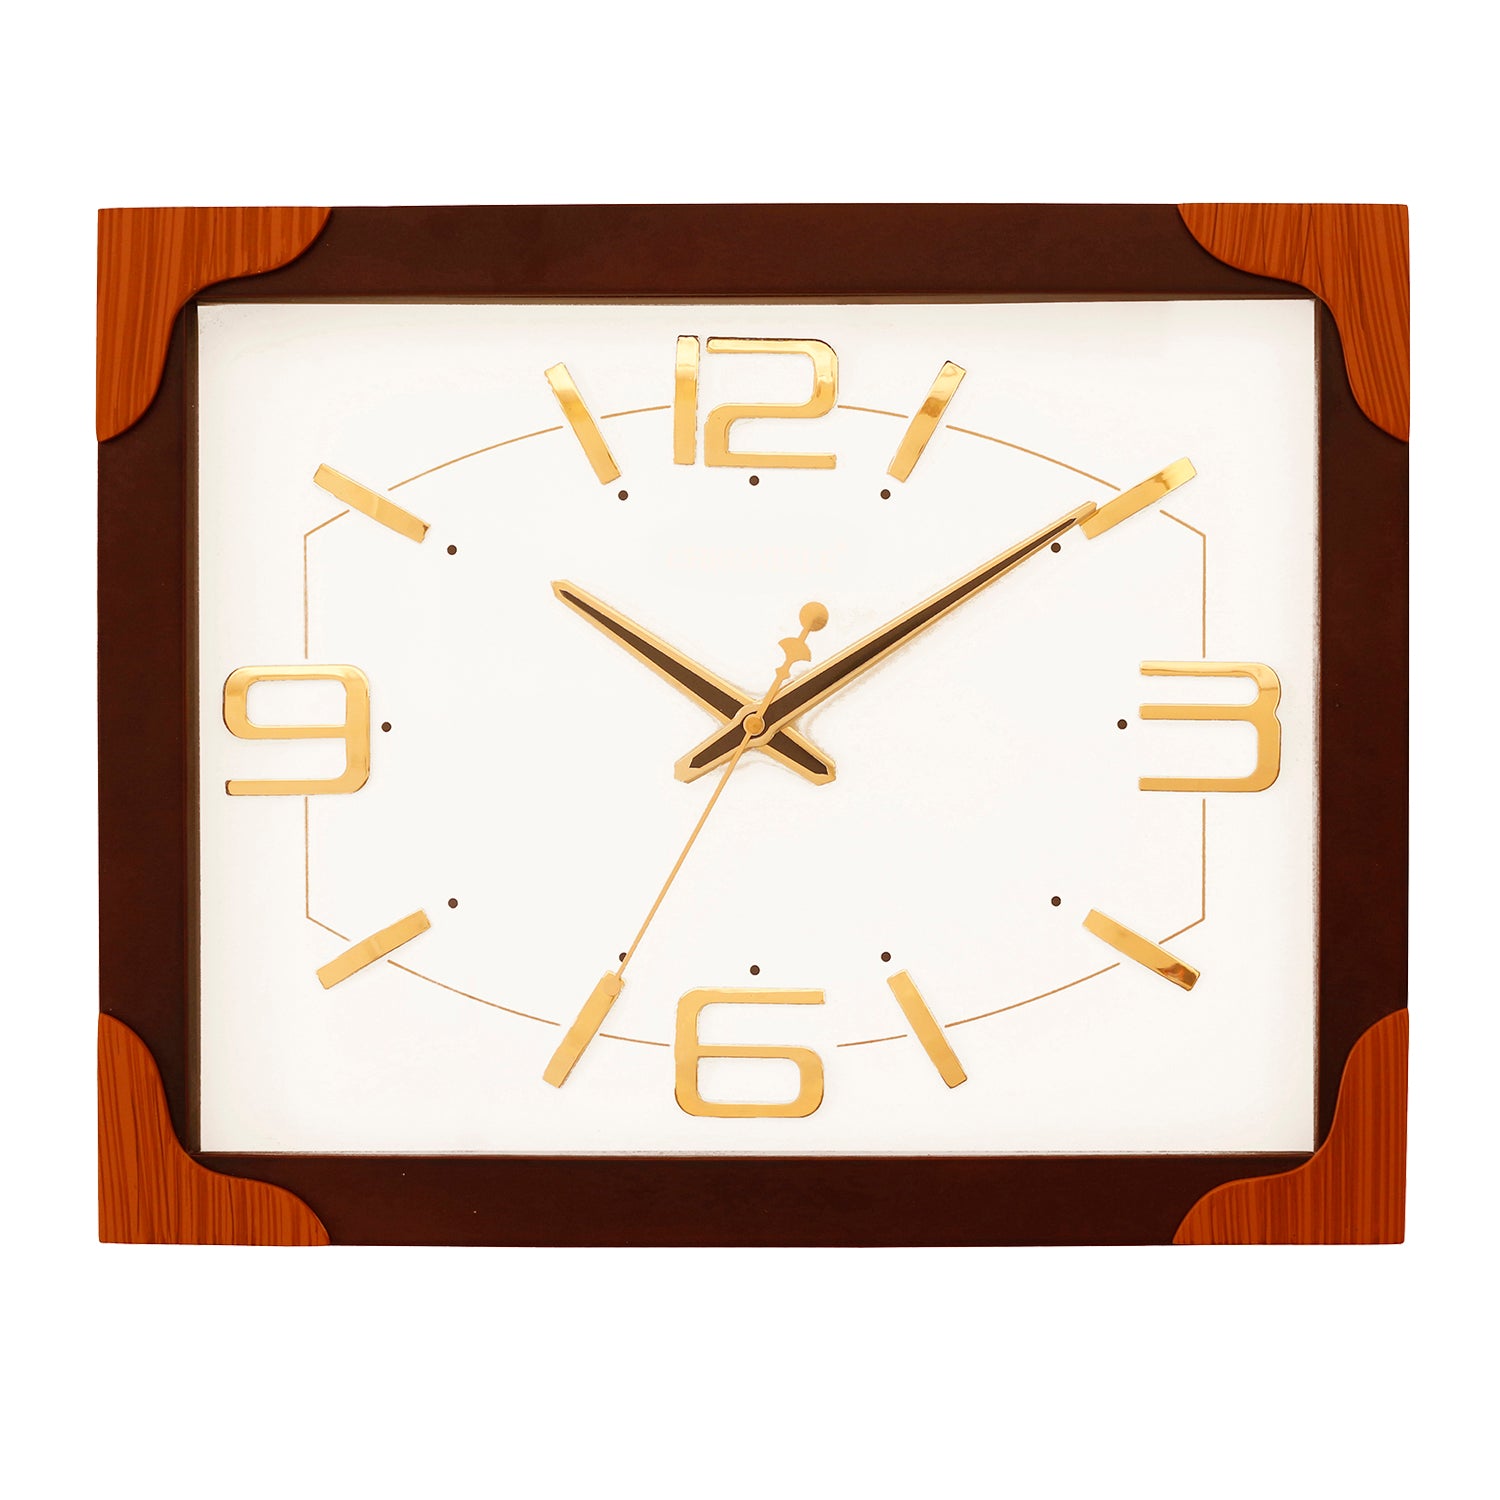 Rosewood rectangle wooden analog wall clock(33 cm x 40.5 cm)